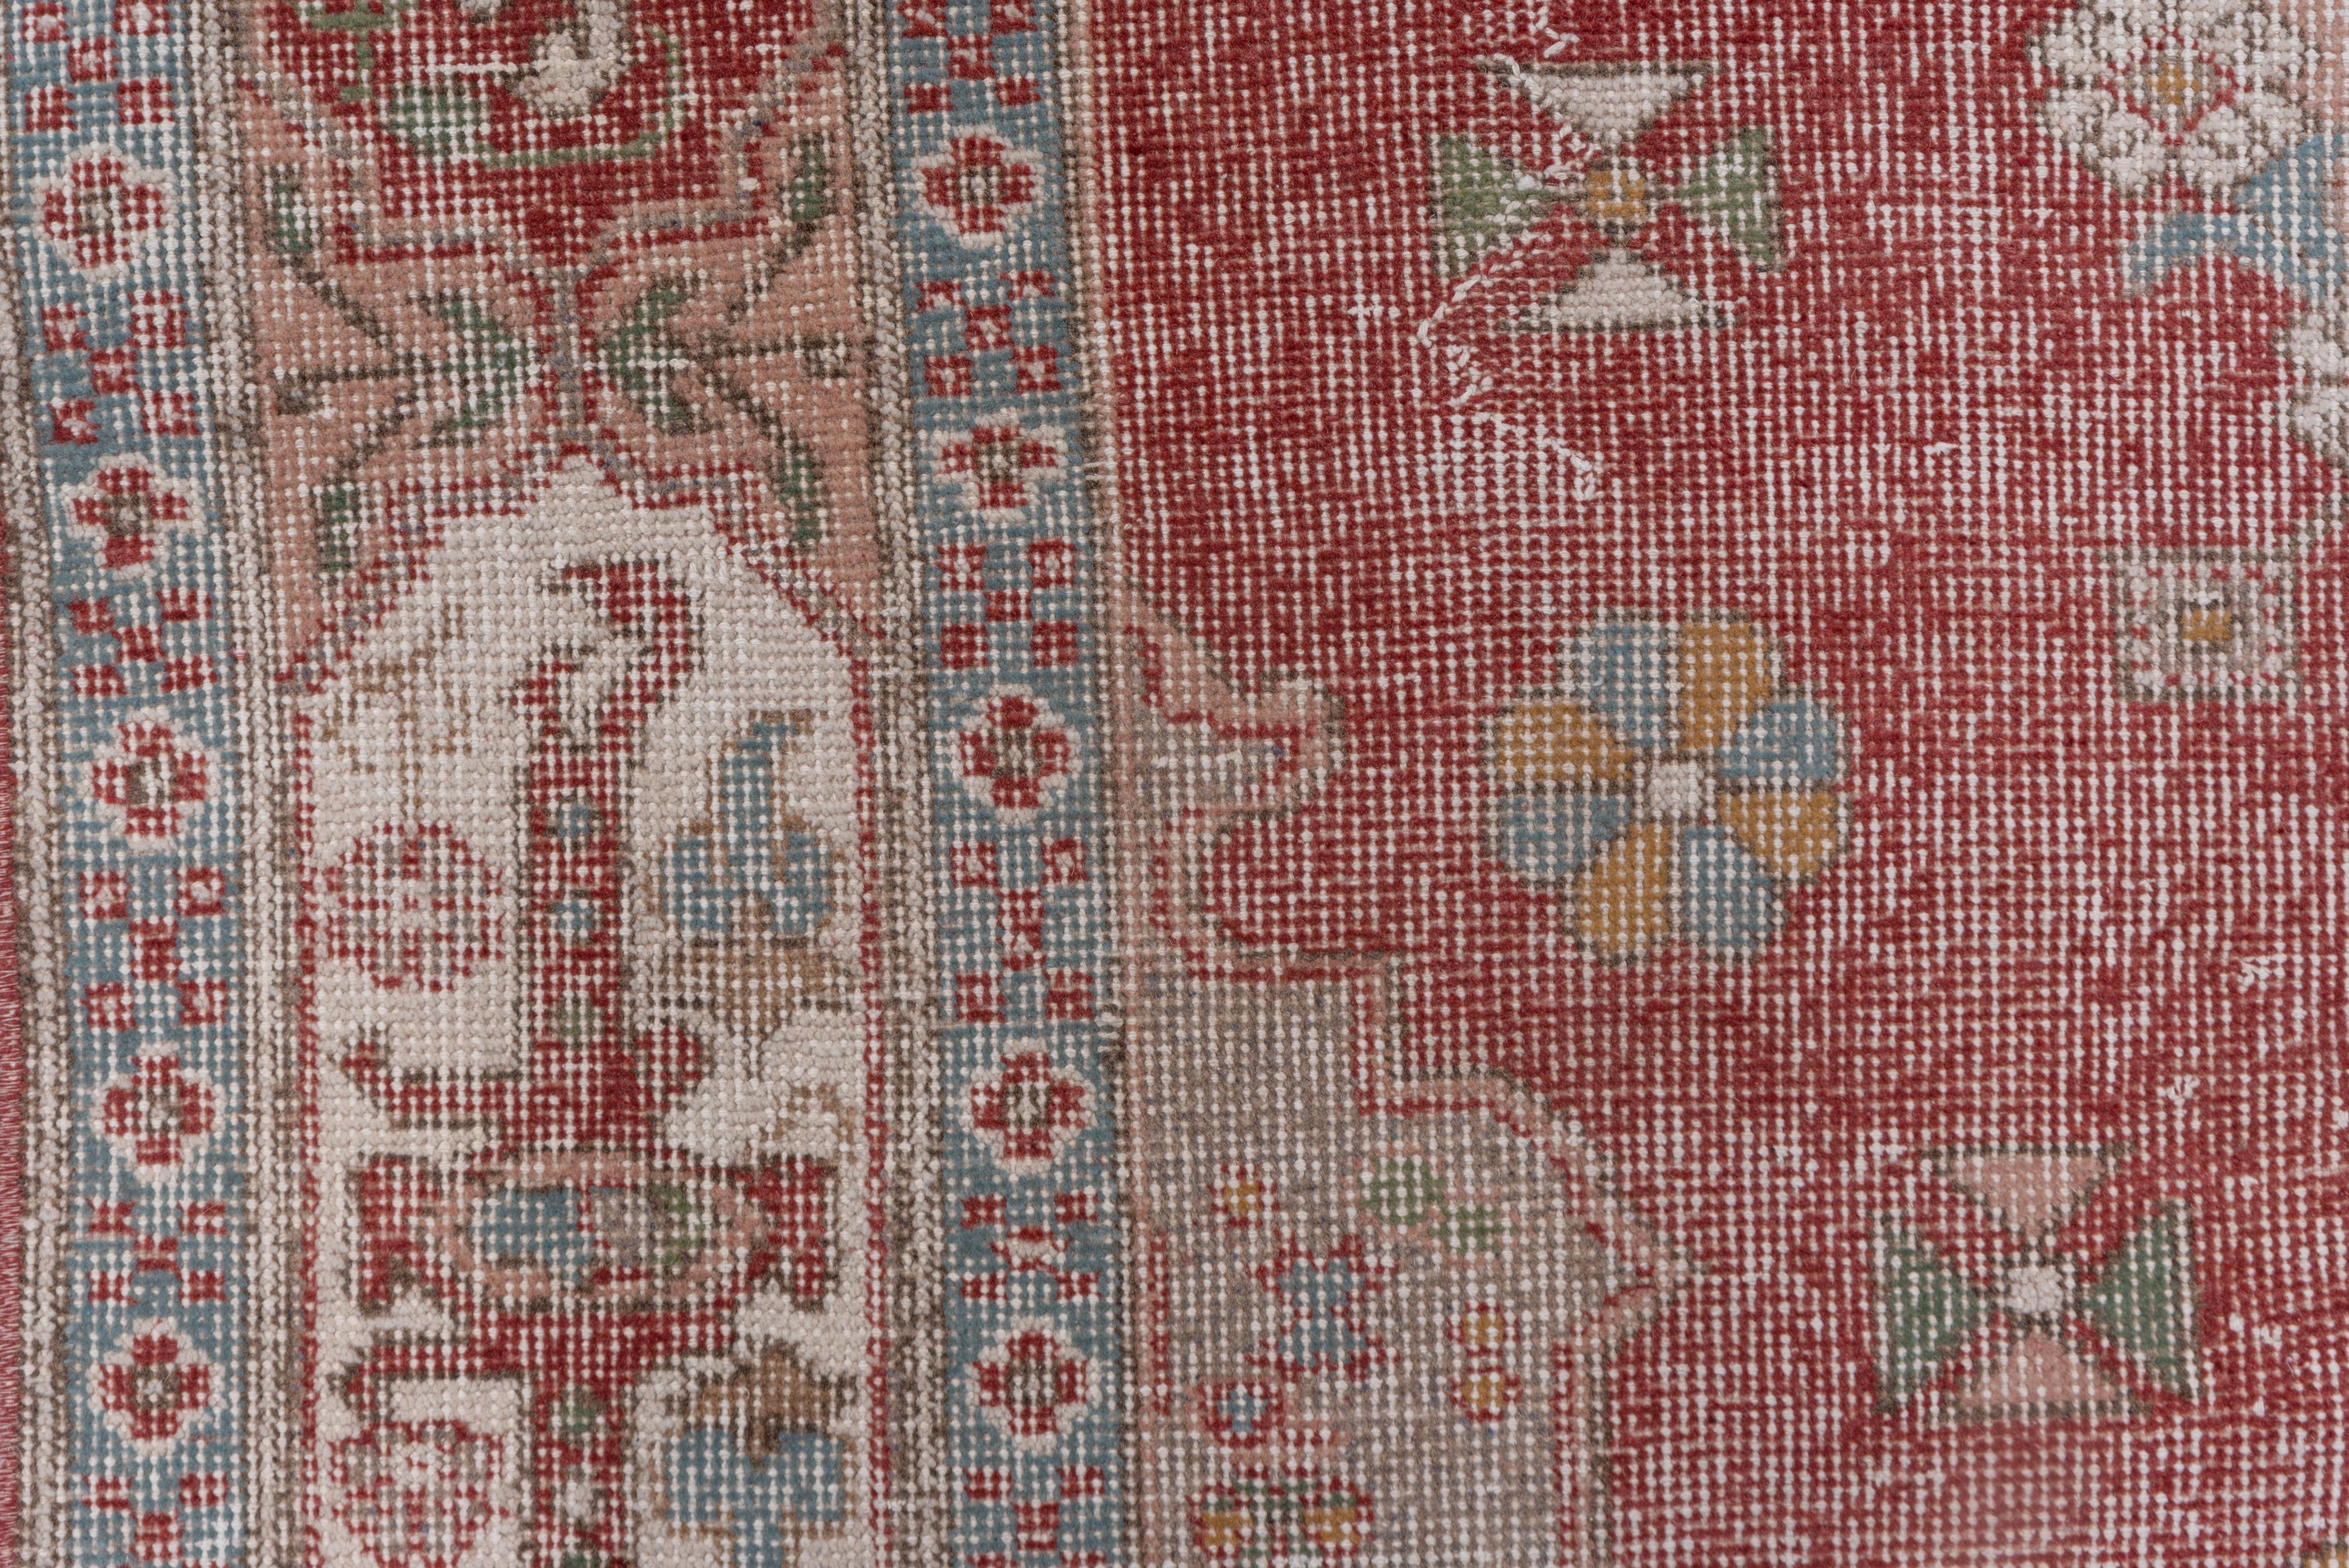 The soft red field supports a double rosette wreath lozenge medallion in the Bergama Turkish style, corners anchored by rosettes, and a 